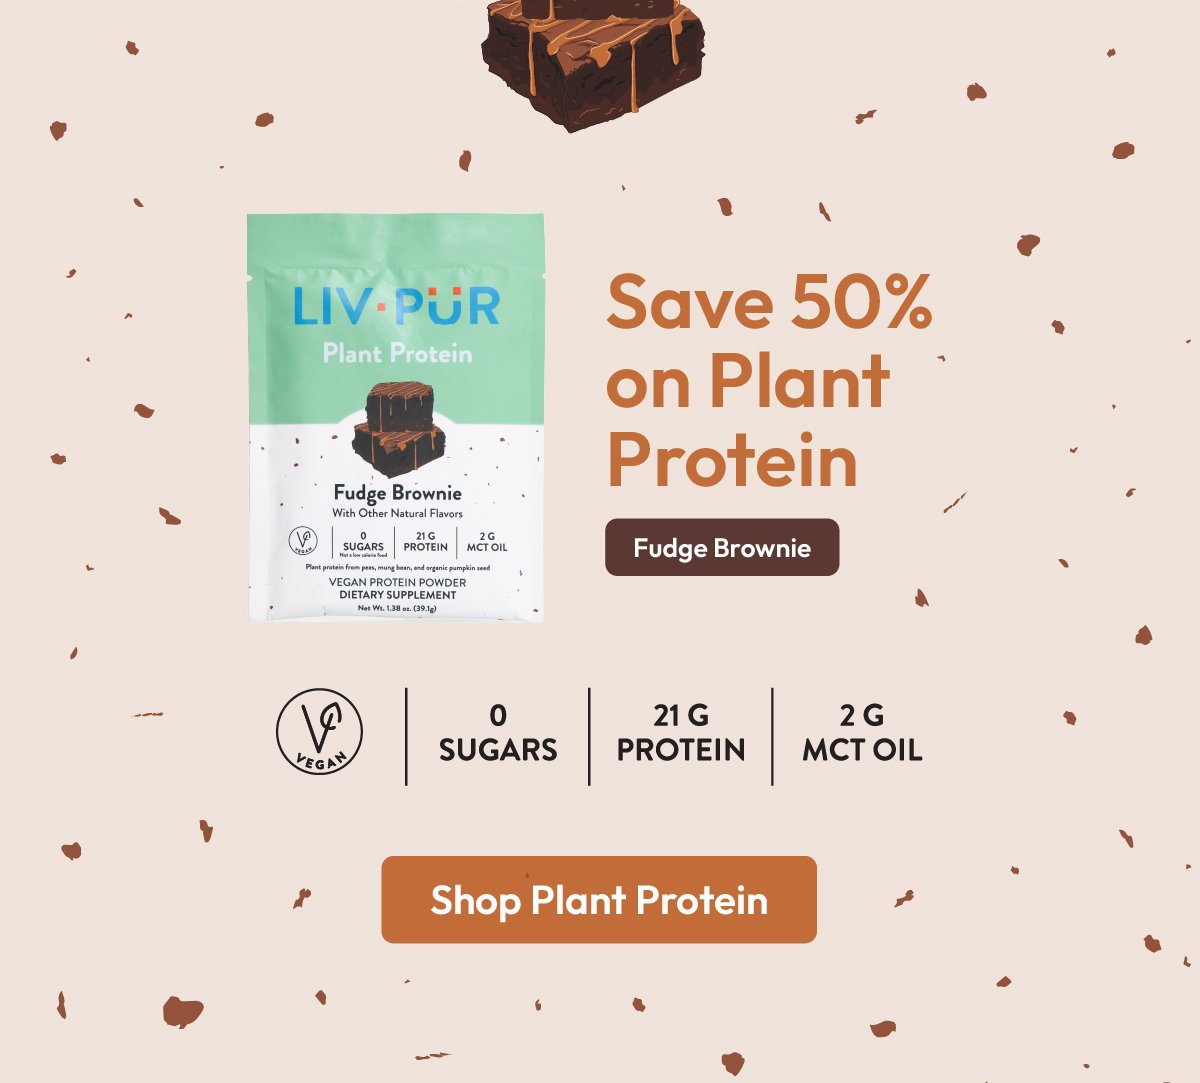 Save 50% on Plant Protein